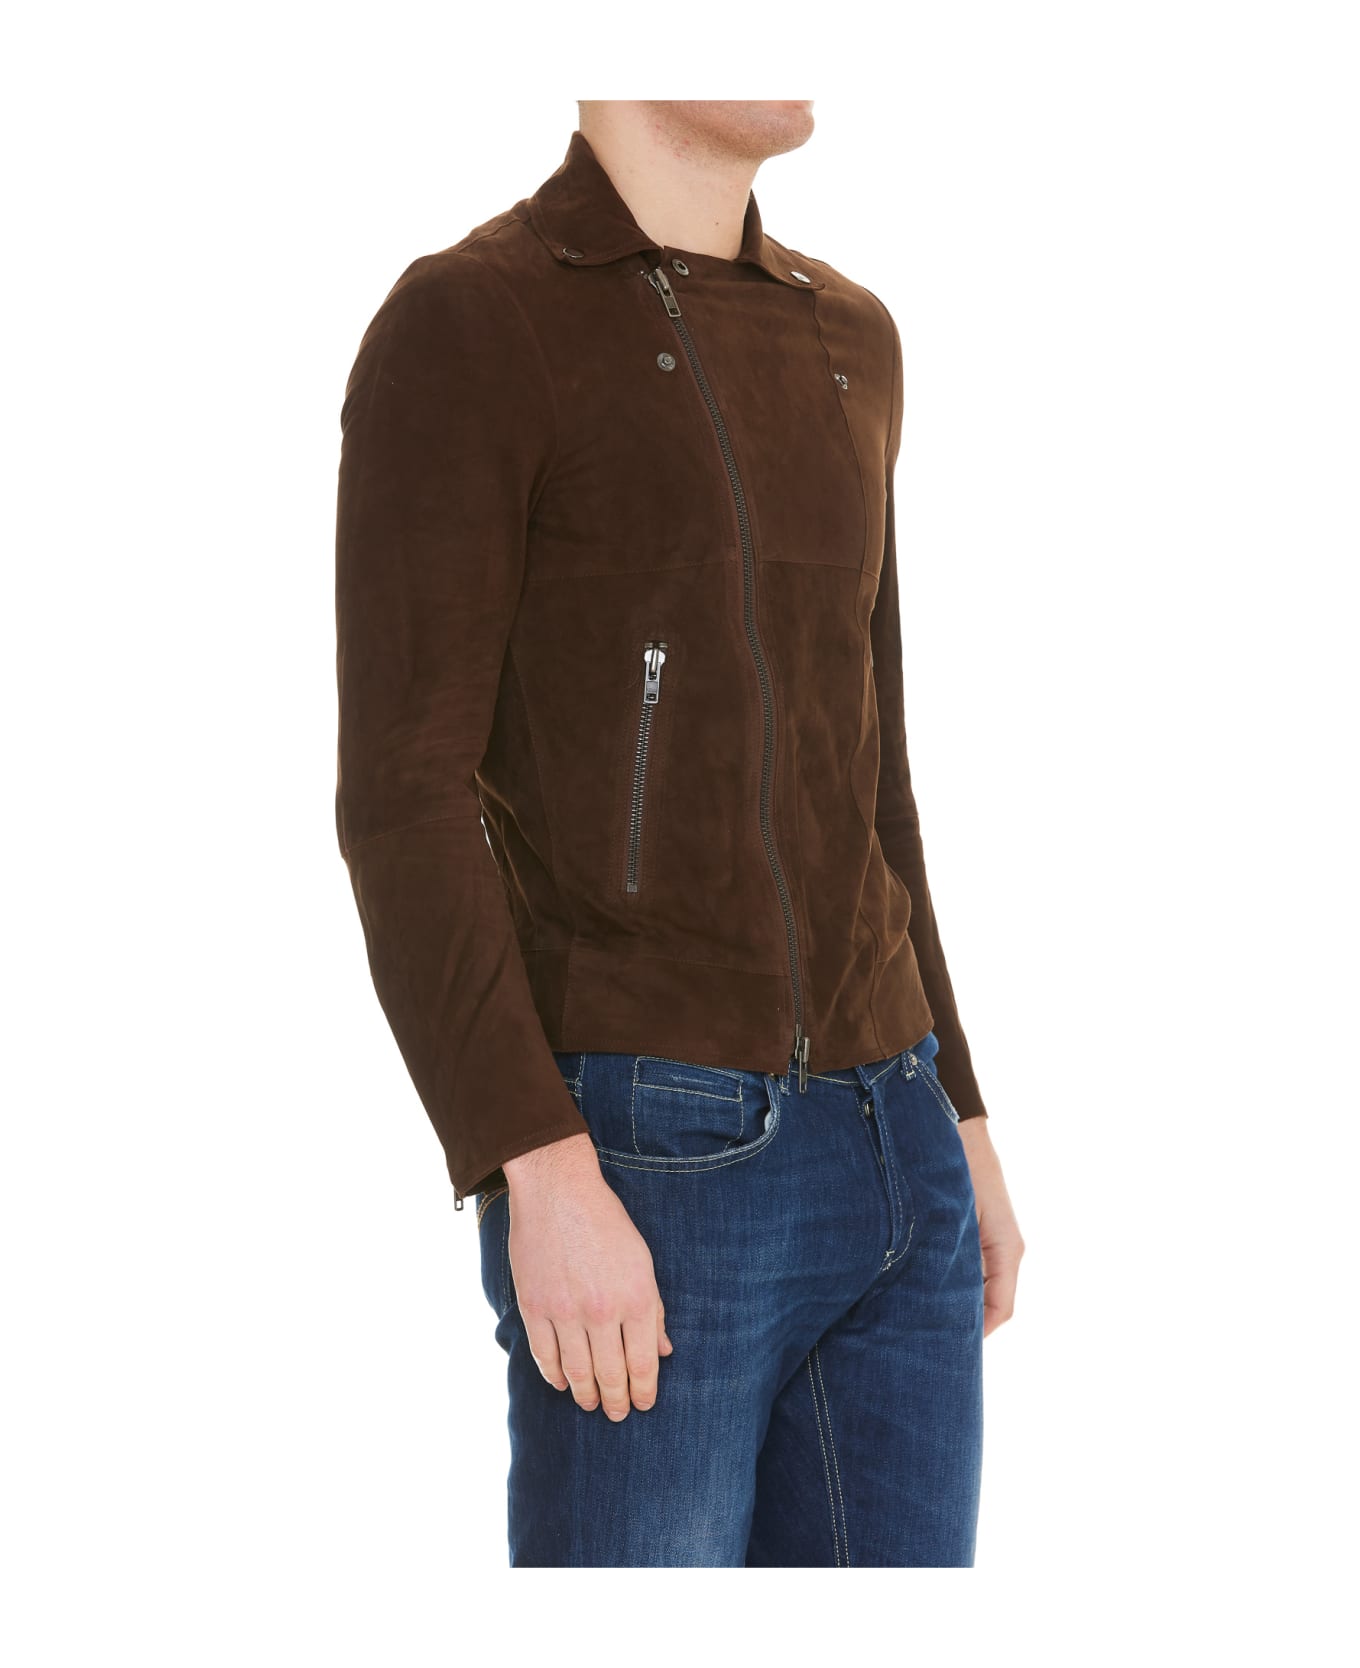 Bully Suede Leather Jacket - BROWN